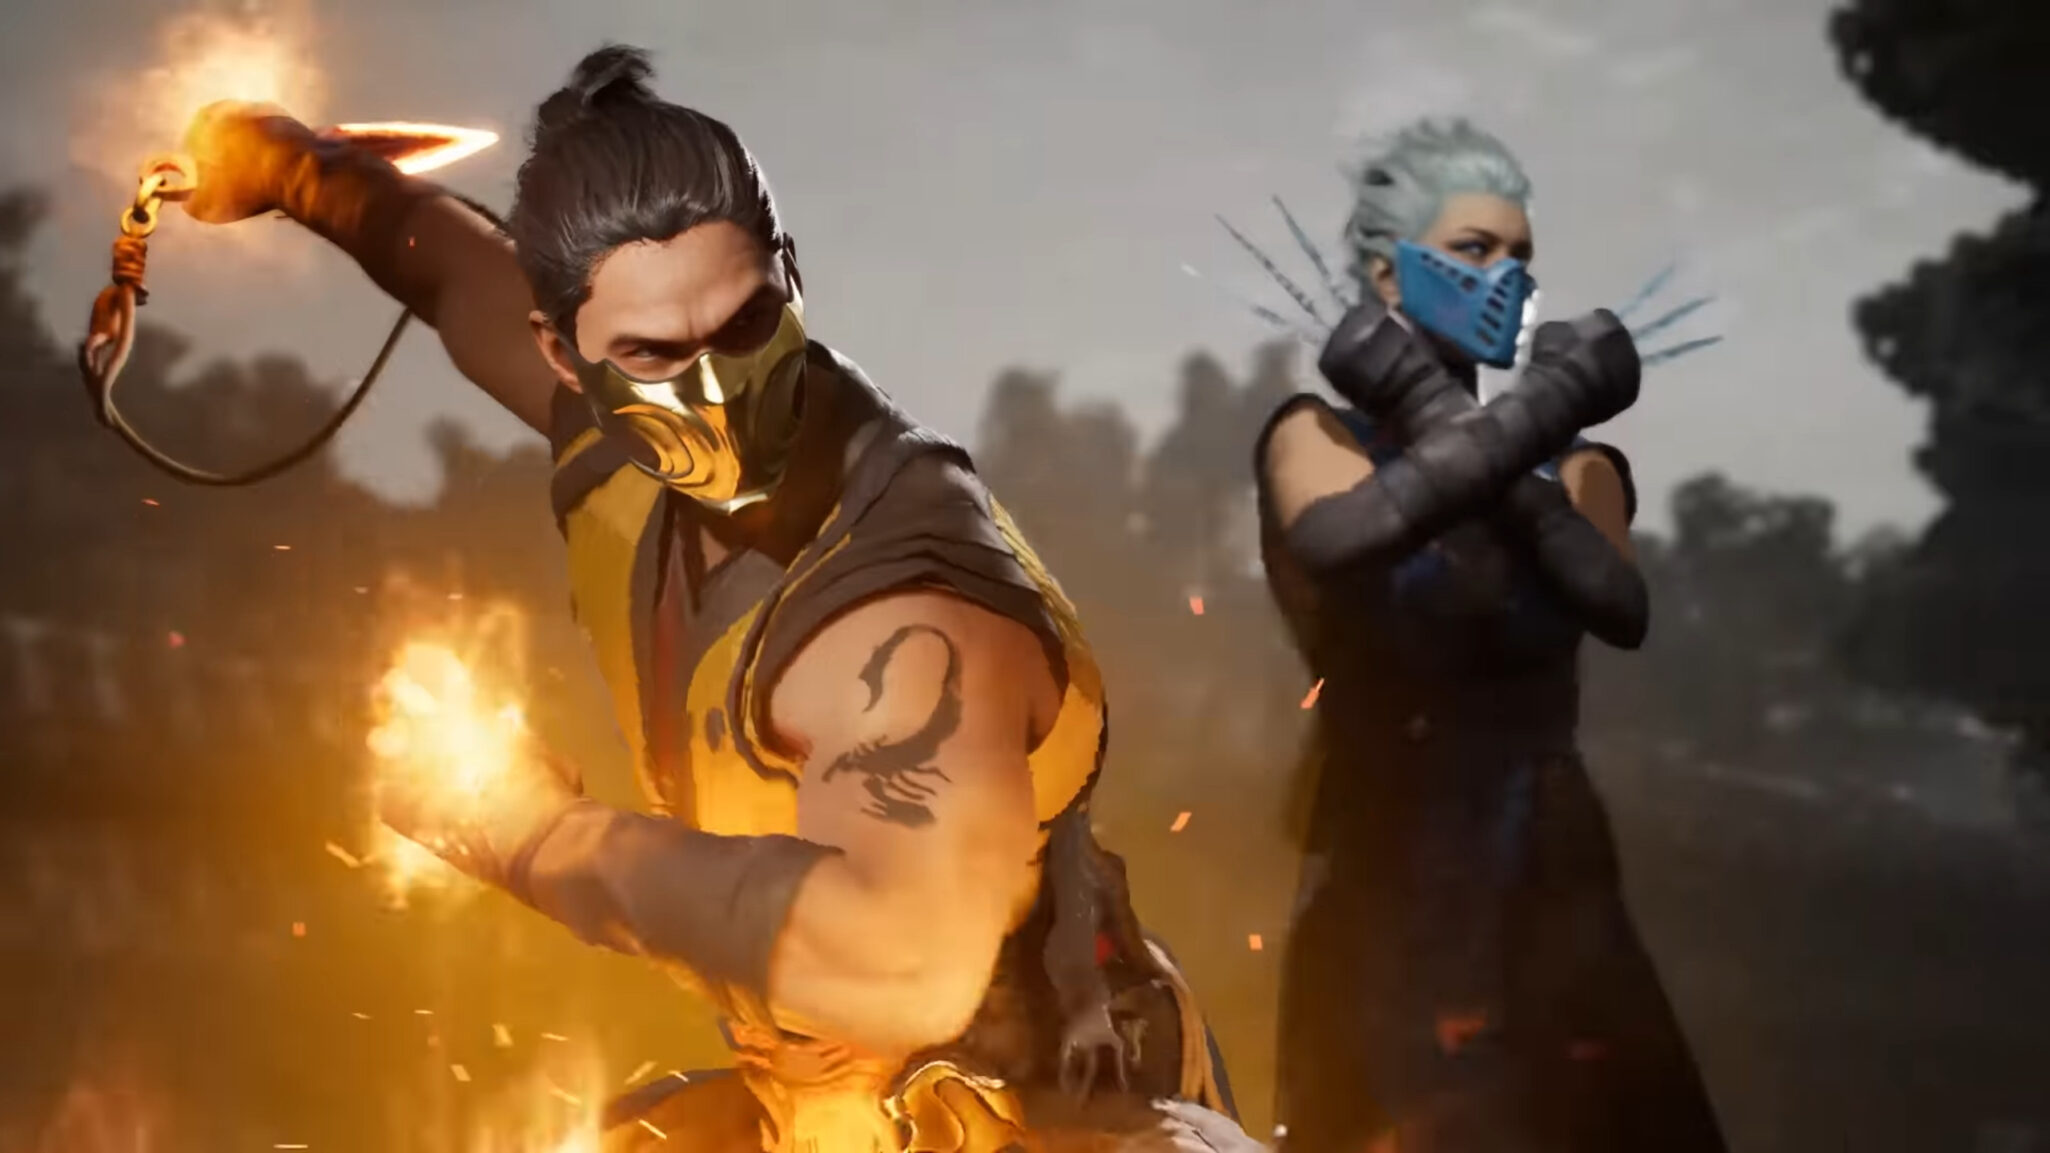 Mortal Kombat 1 will reportedly feature The Boys' Homelander and more